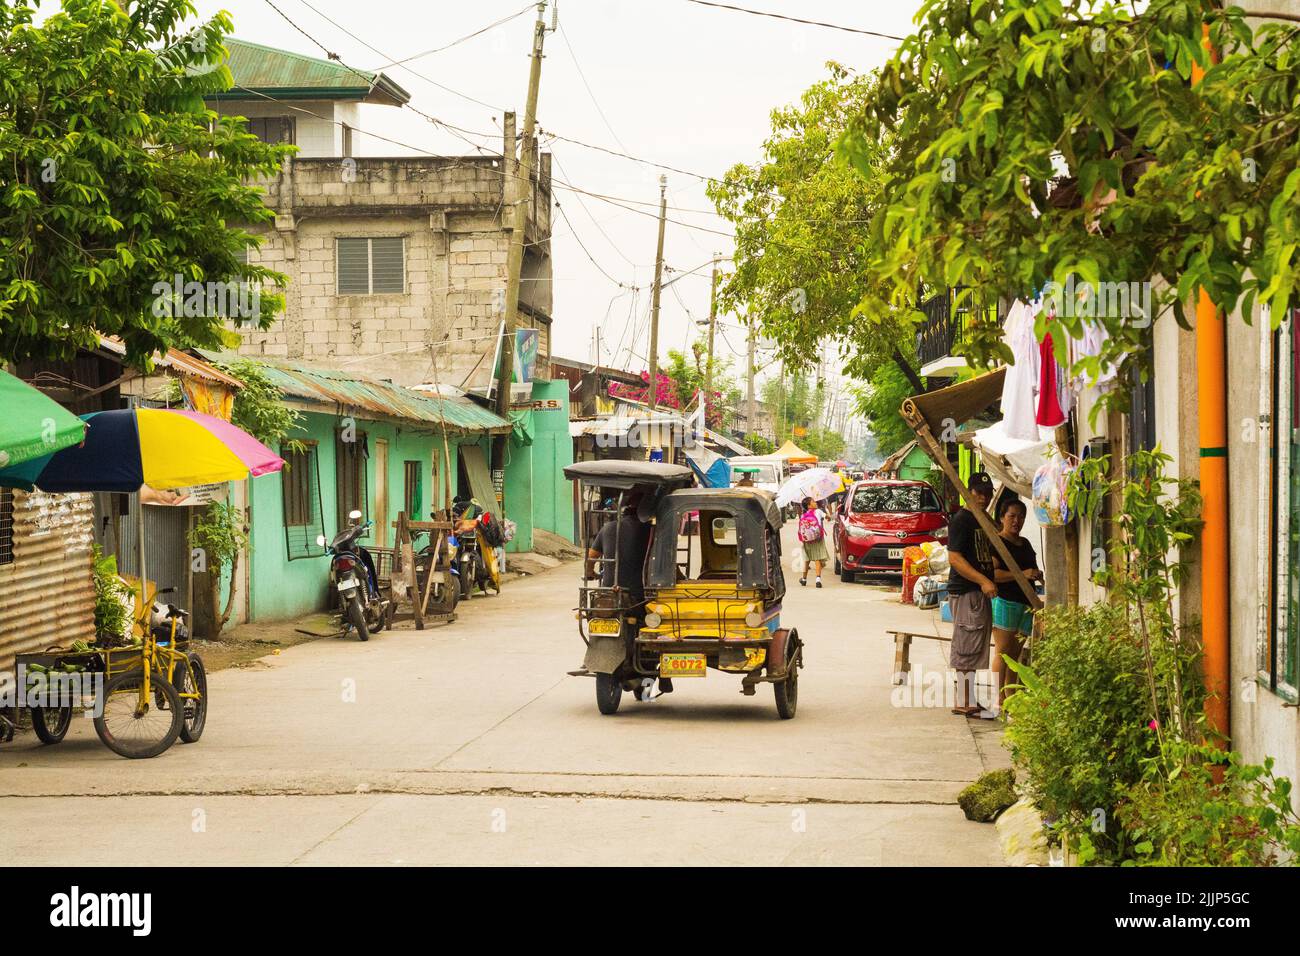 A view of tricycle taxi on the Philippines road surrounded by old houses and shops Stock Photo